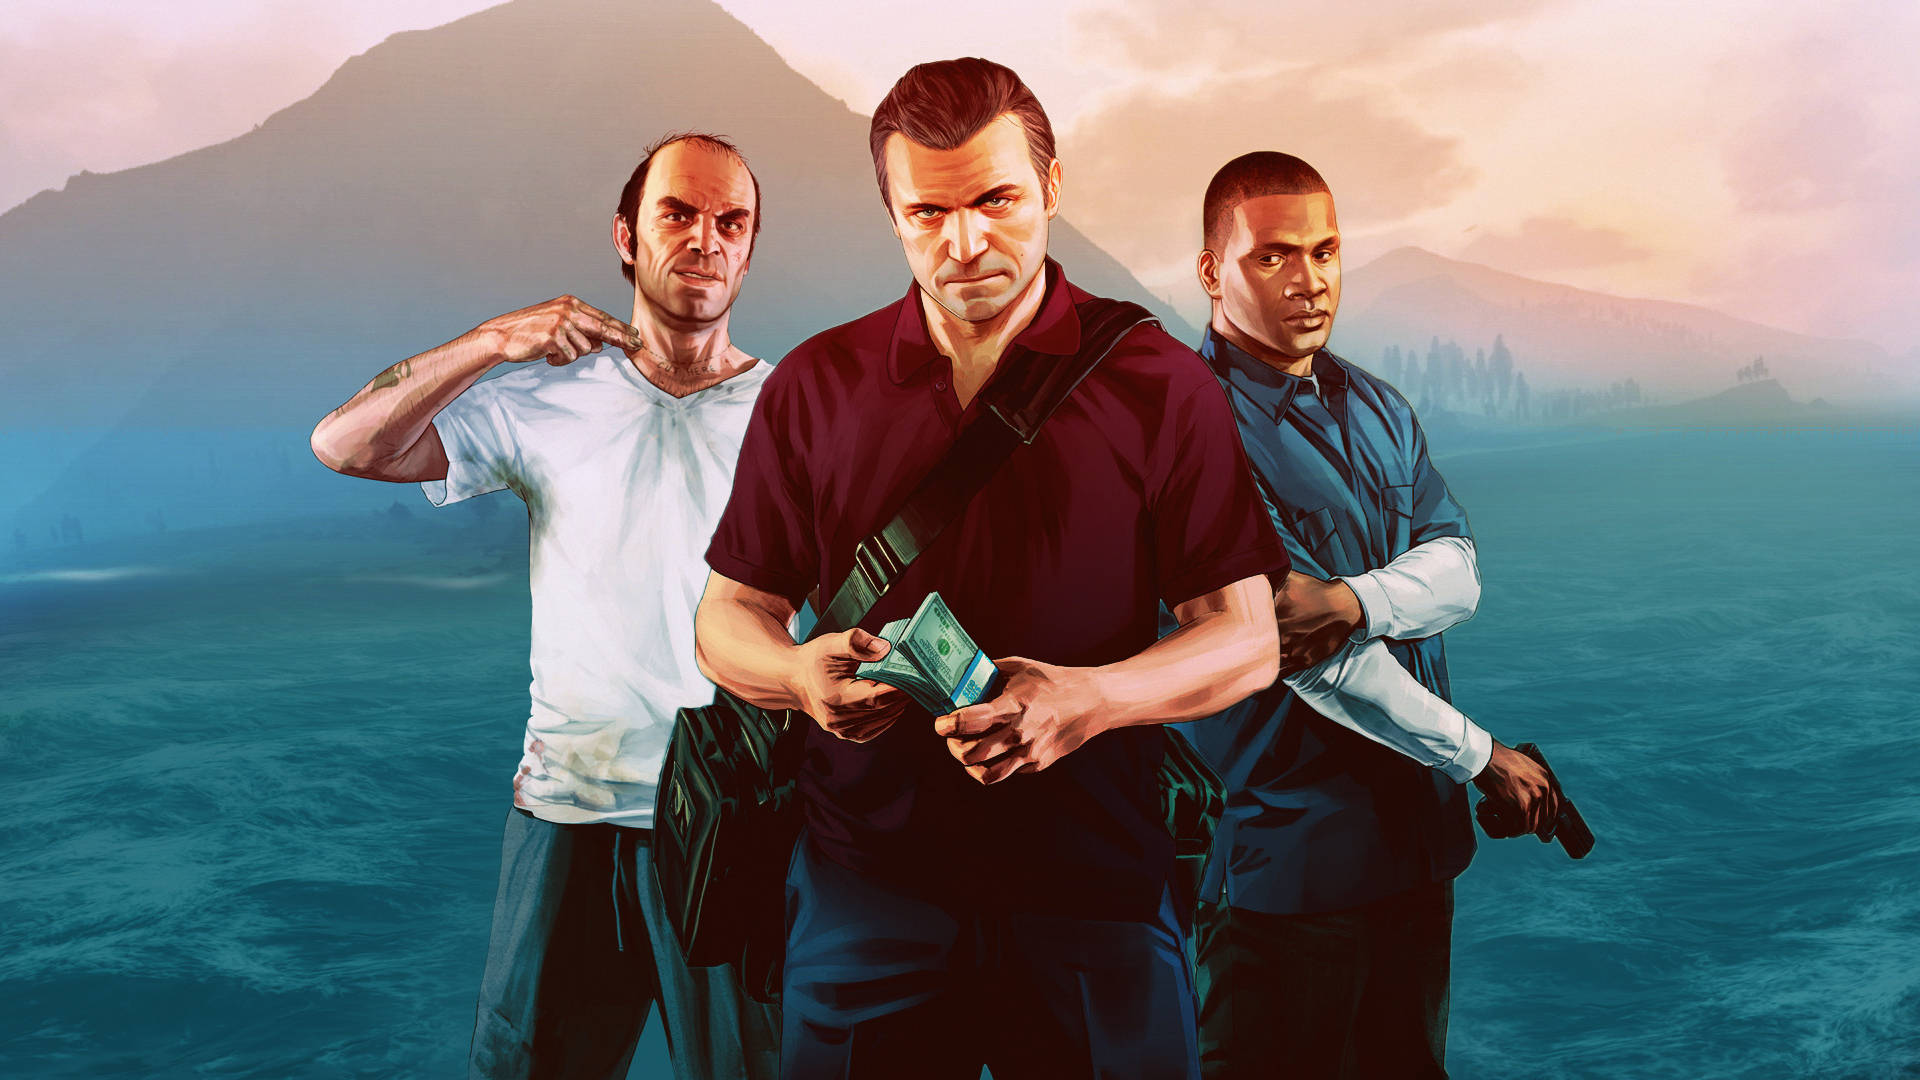 Cool Gta Three Characters Background